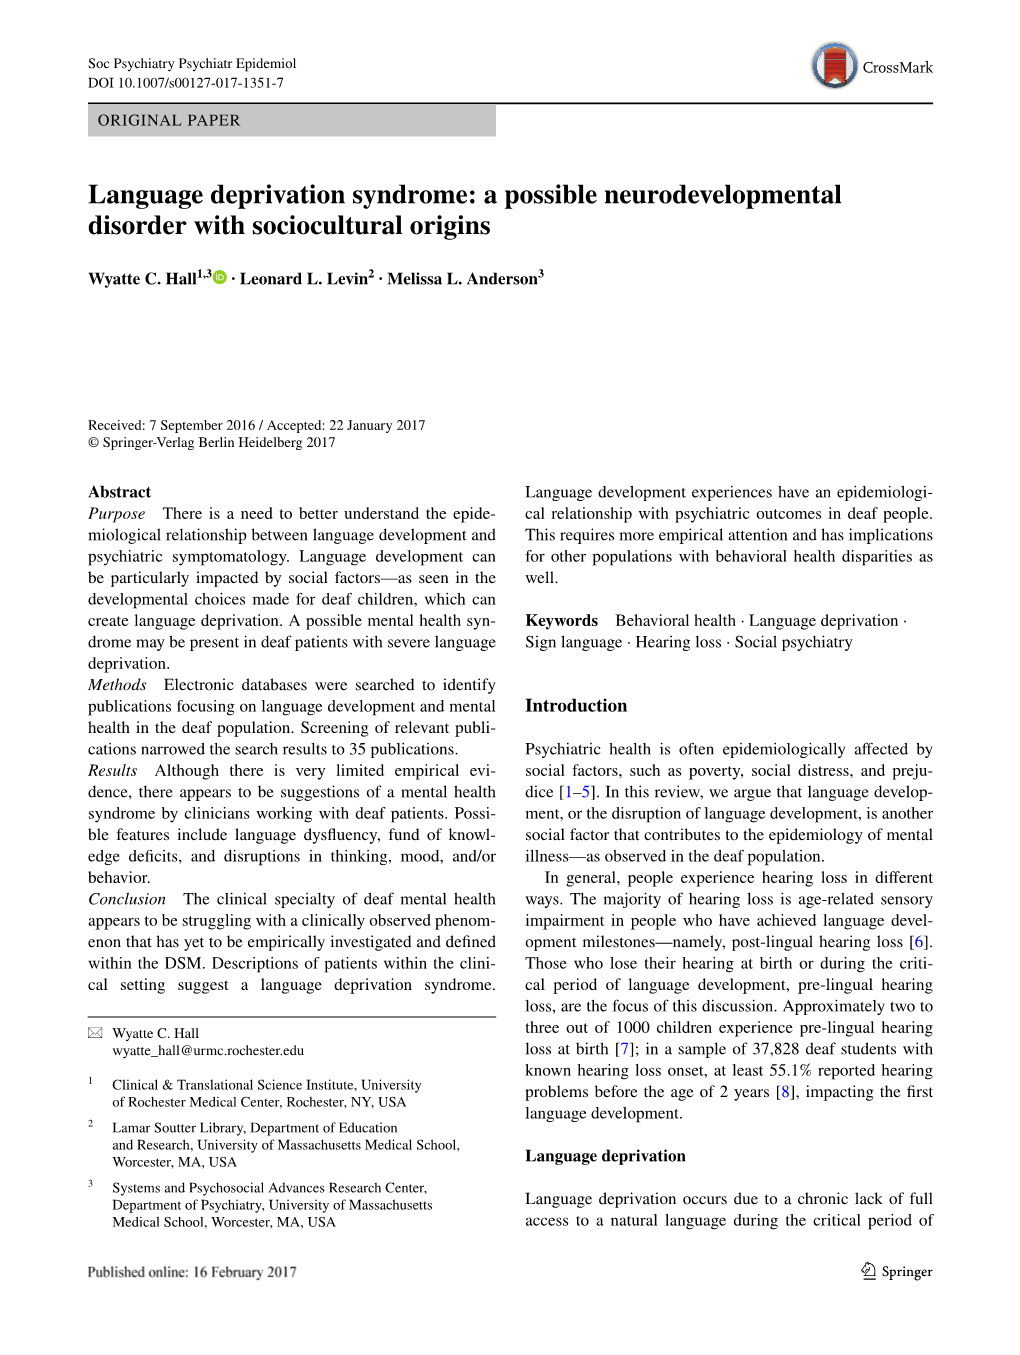 Language Deprivation Syndrome: a Possible Neurodevelopmental Disorder with Sociocultural Origins